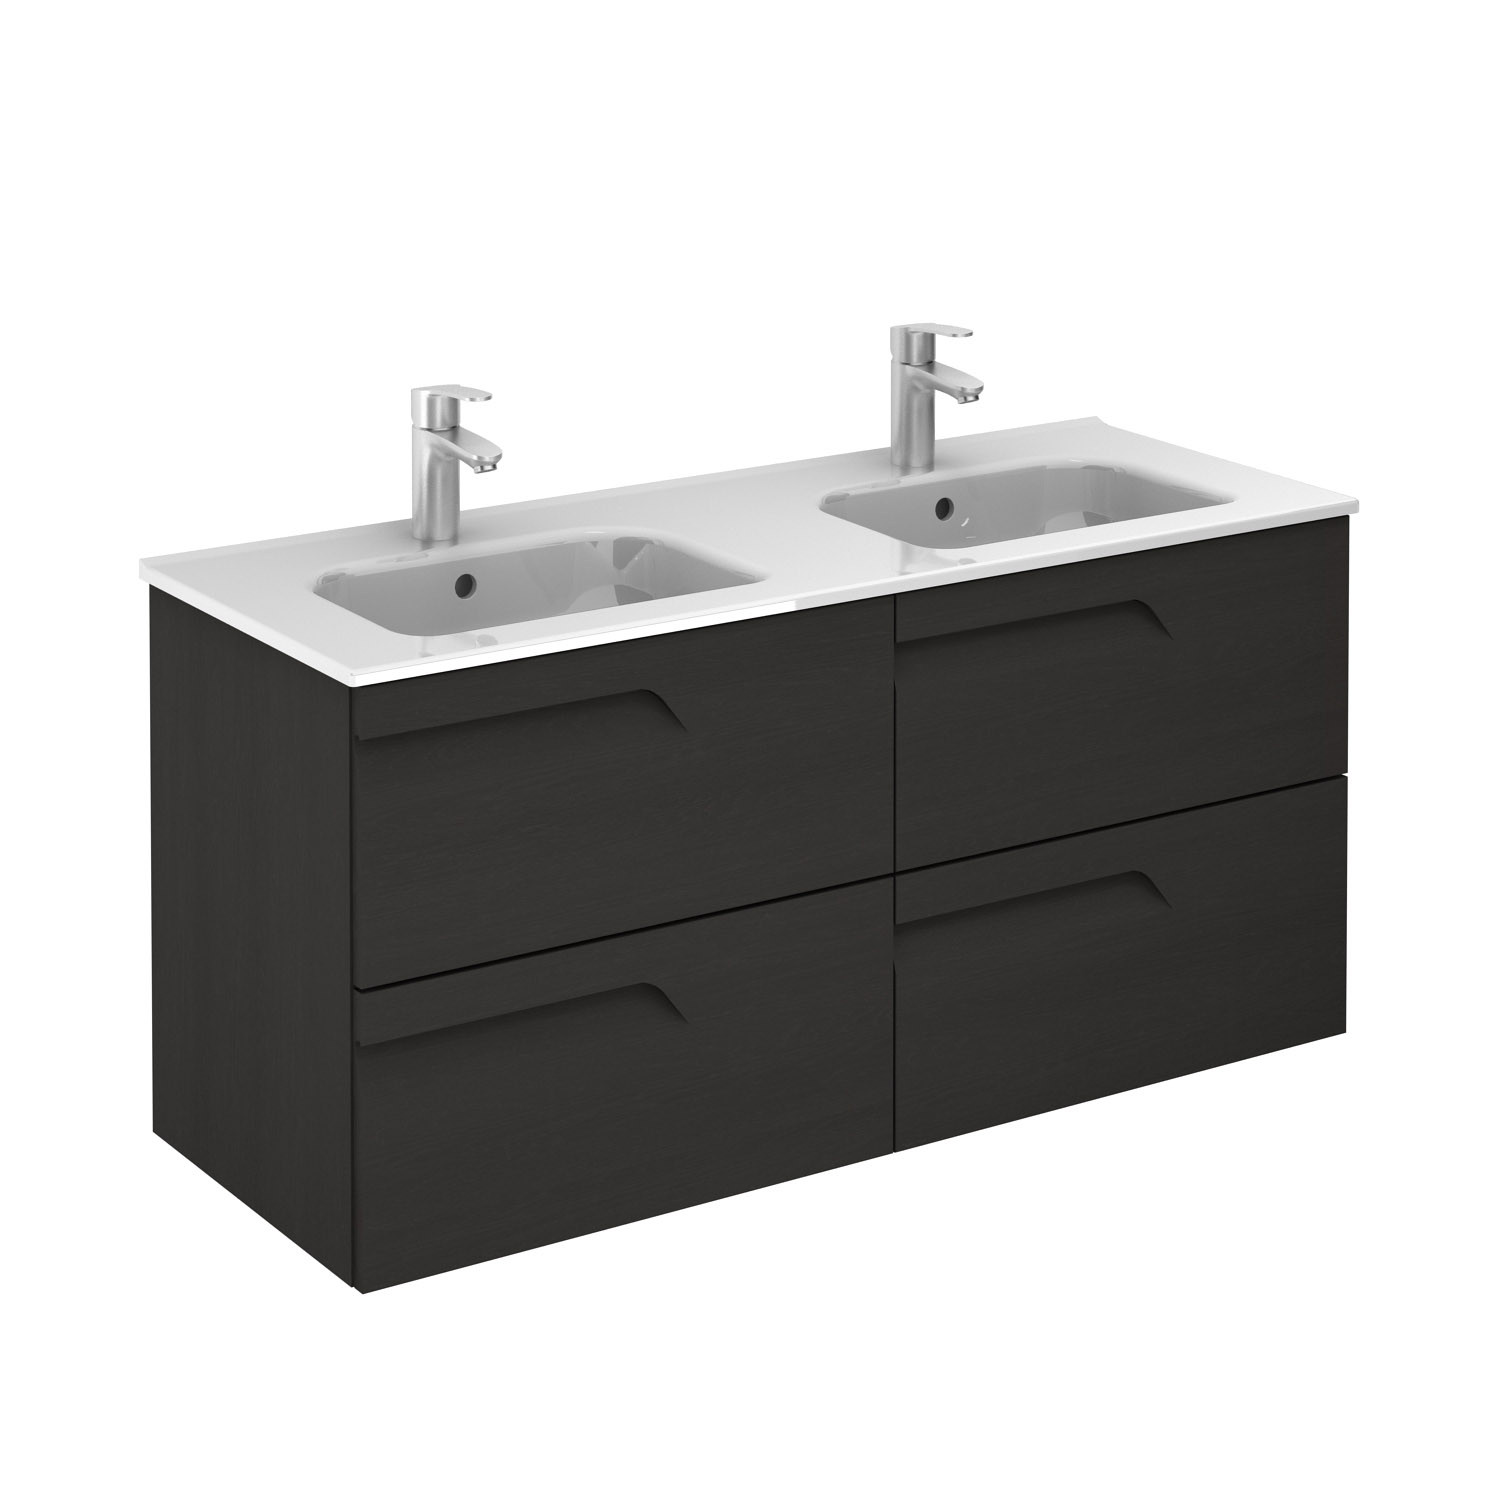 Vitale 1200mm 4 Drawer Double Basin, Double Sink And Vanity Unit